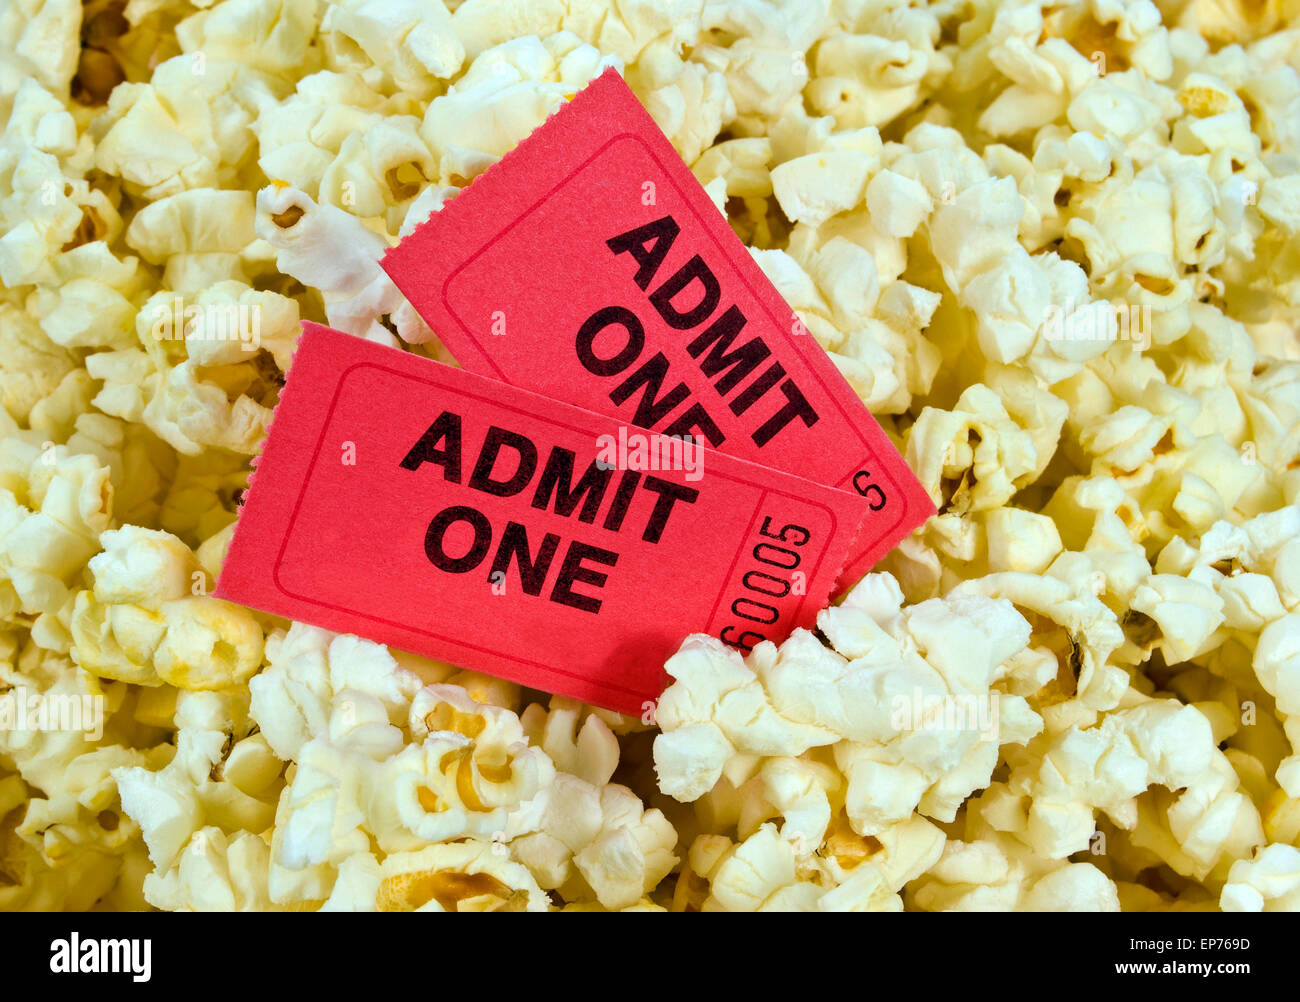 Movie Tickets In Center Of Fresh Popcorn Popcorn.  Summer Fun At The Movies Stock Photo